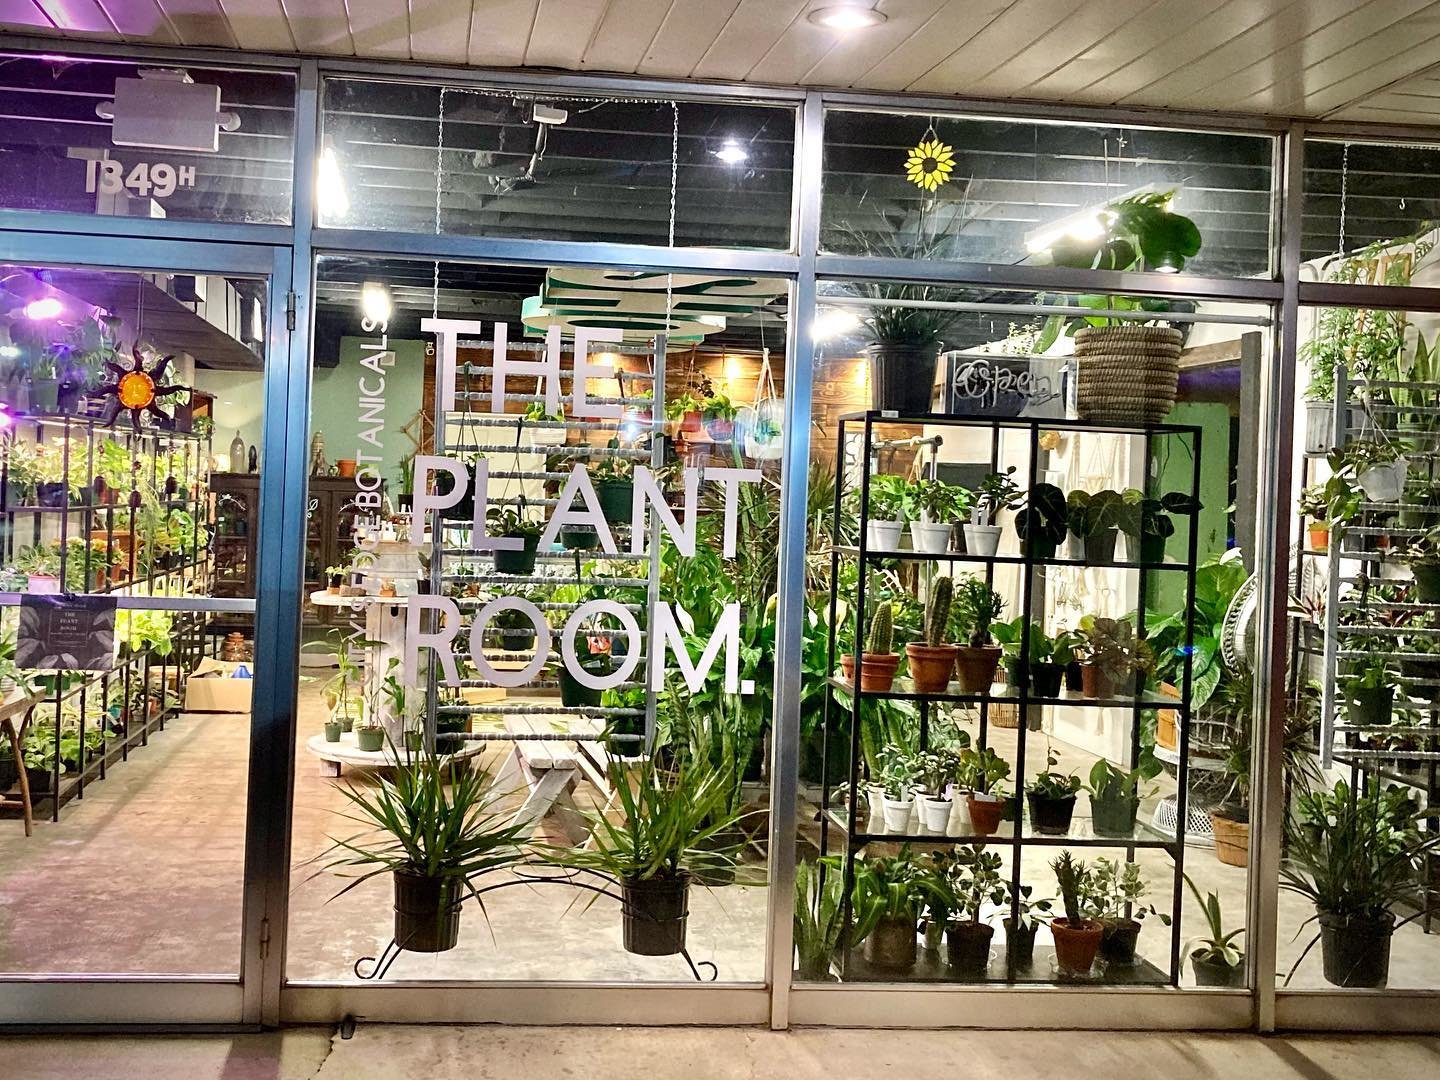 The Plant Room by City’s Edge Botanicals is open on South Glenstone Avenue.